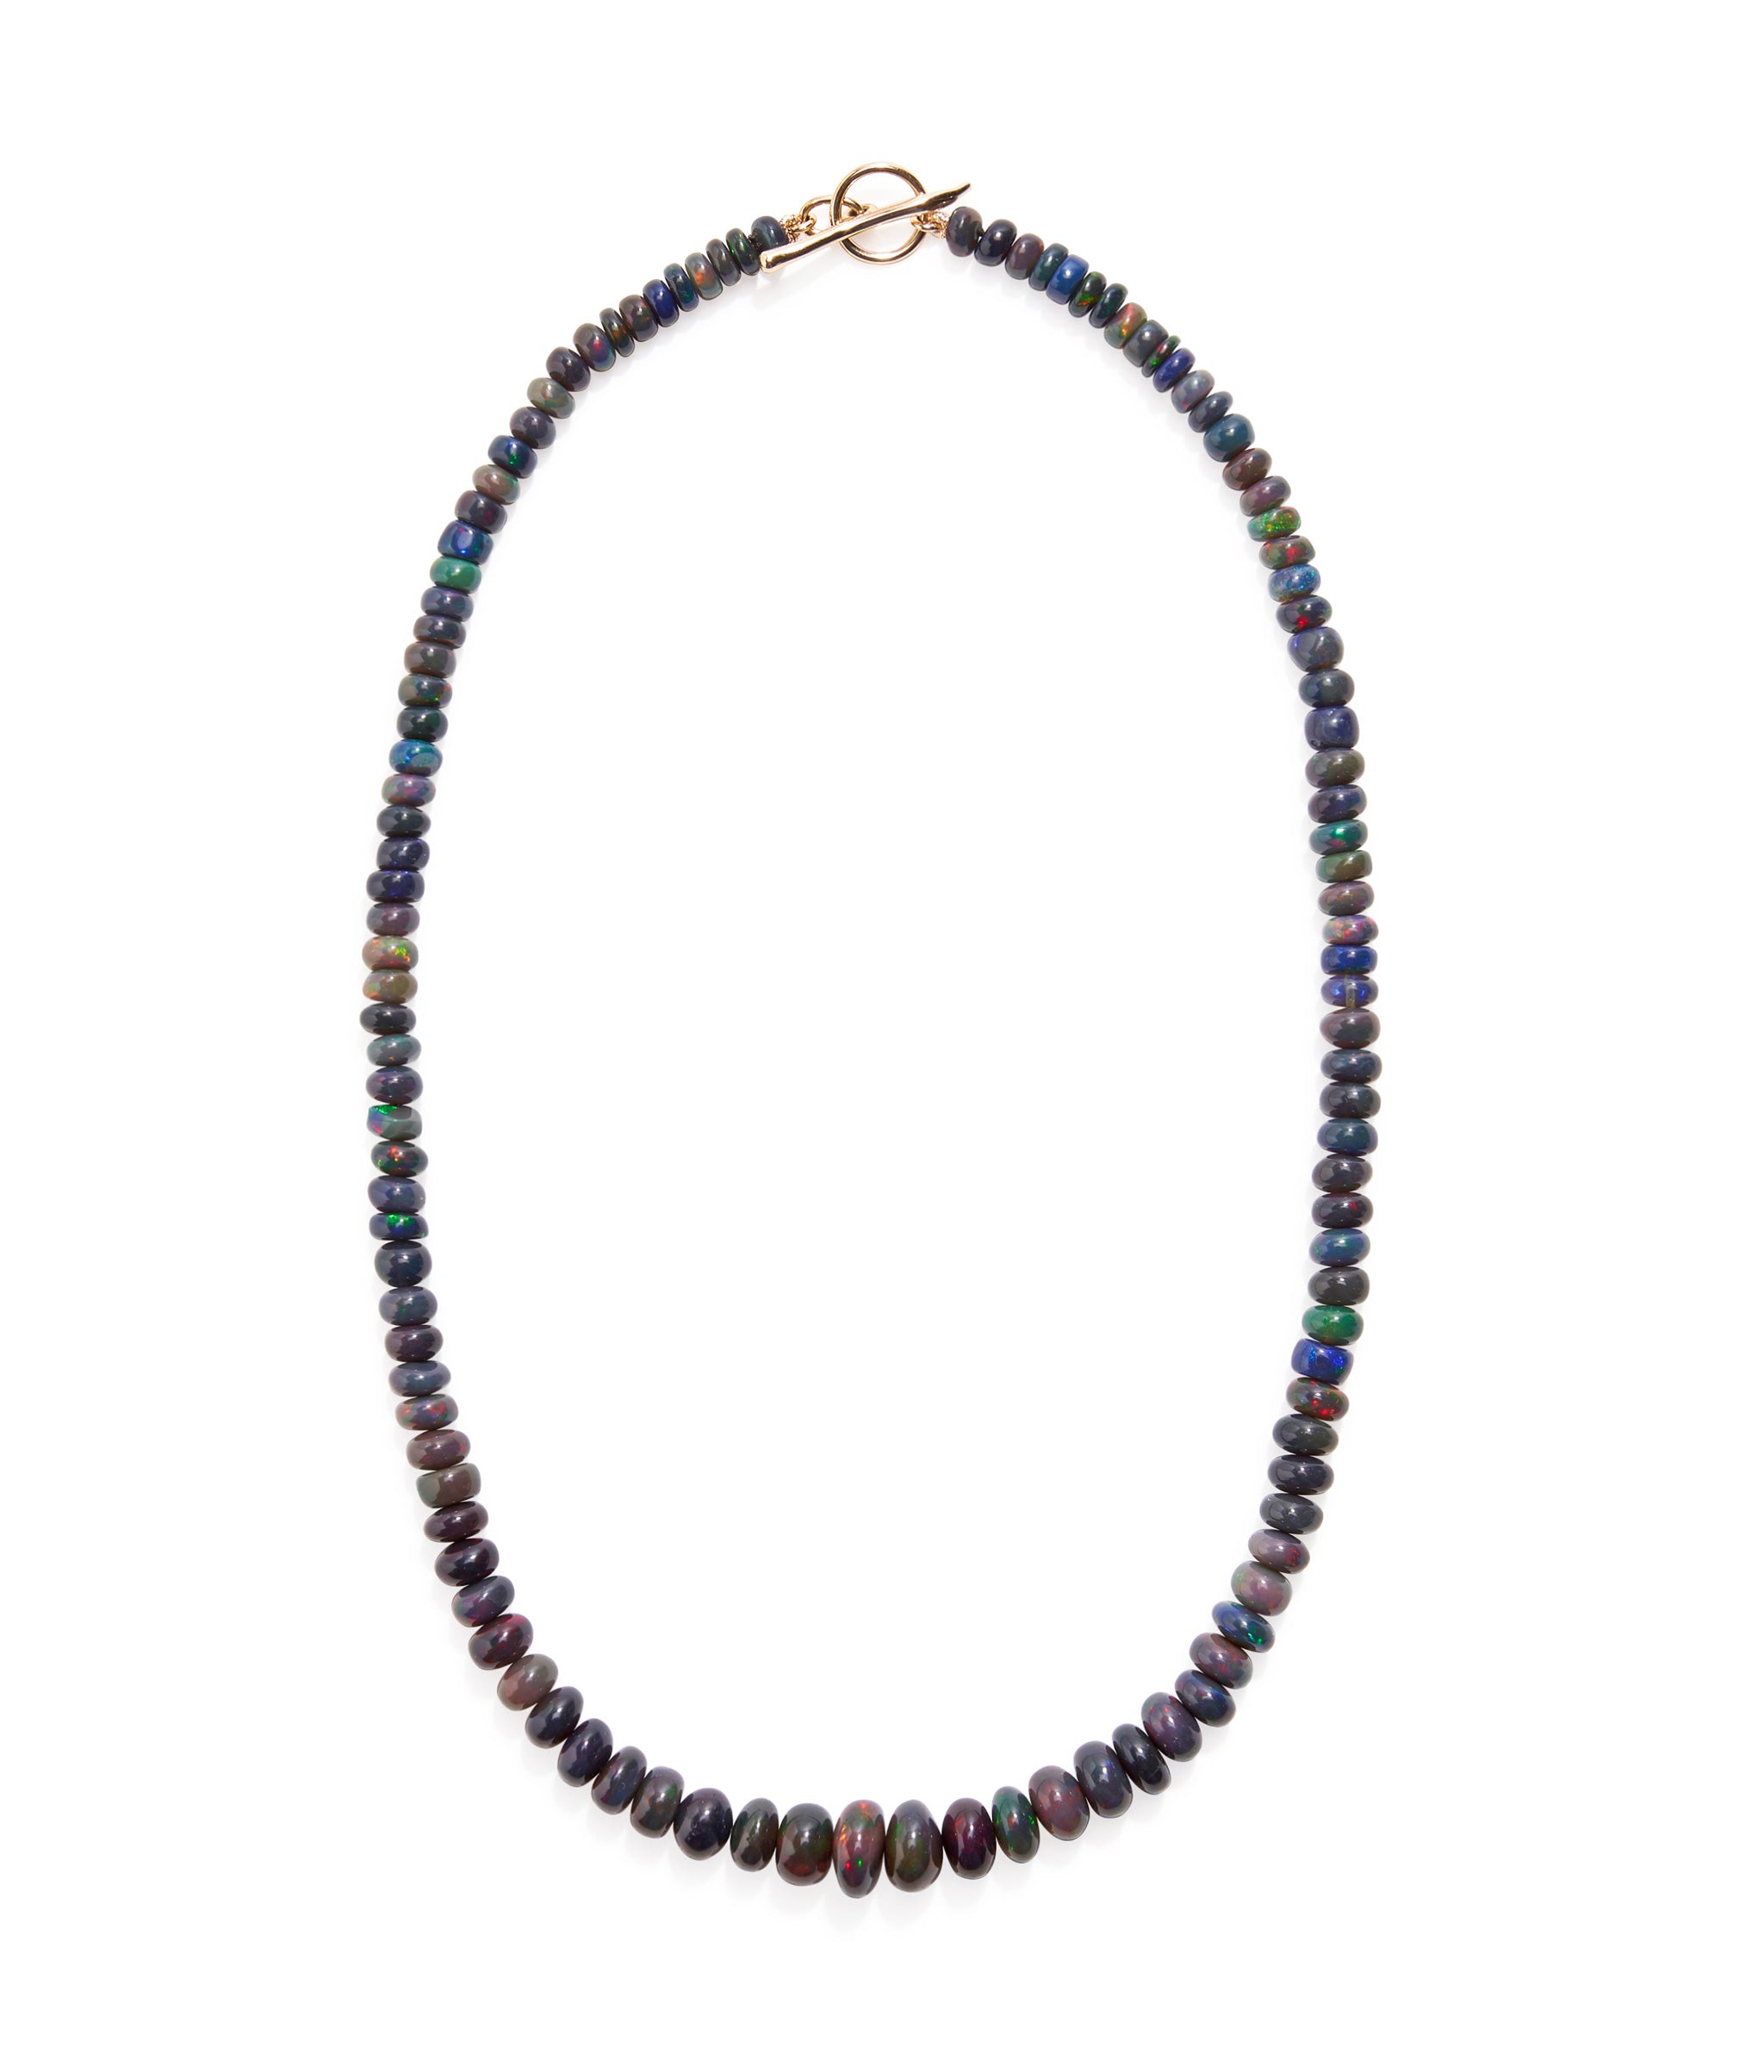 Black Opal and 14k Gold Necklace. Graduated small black opal bead with gold toggle and ring closure.